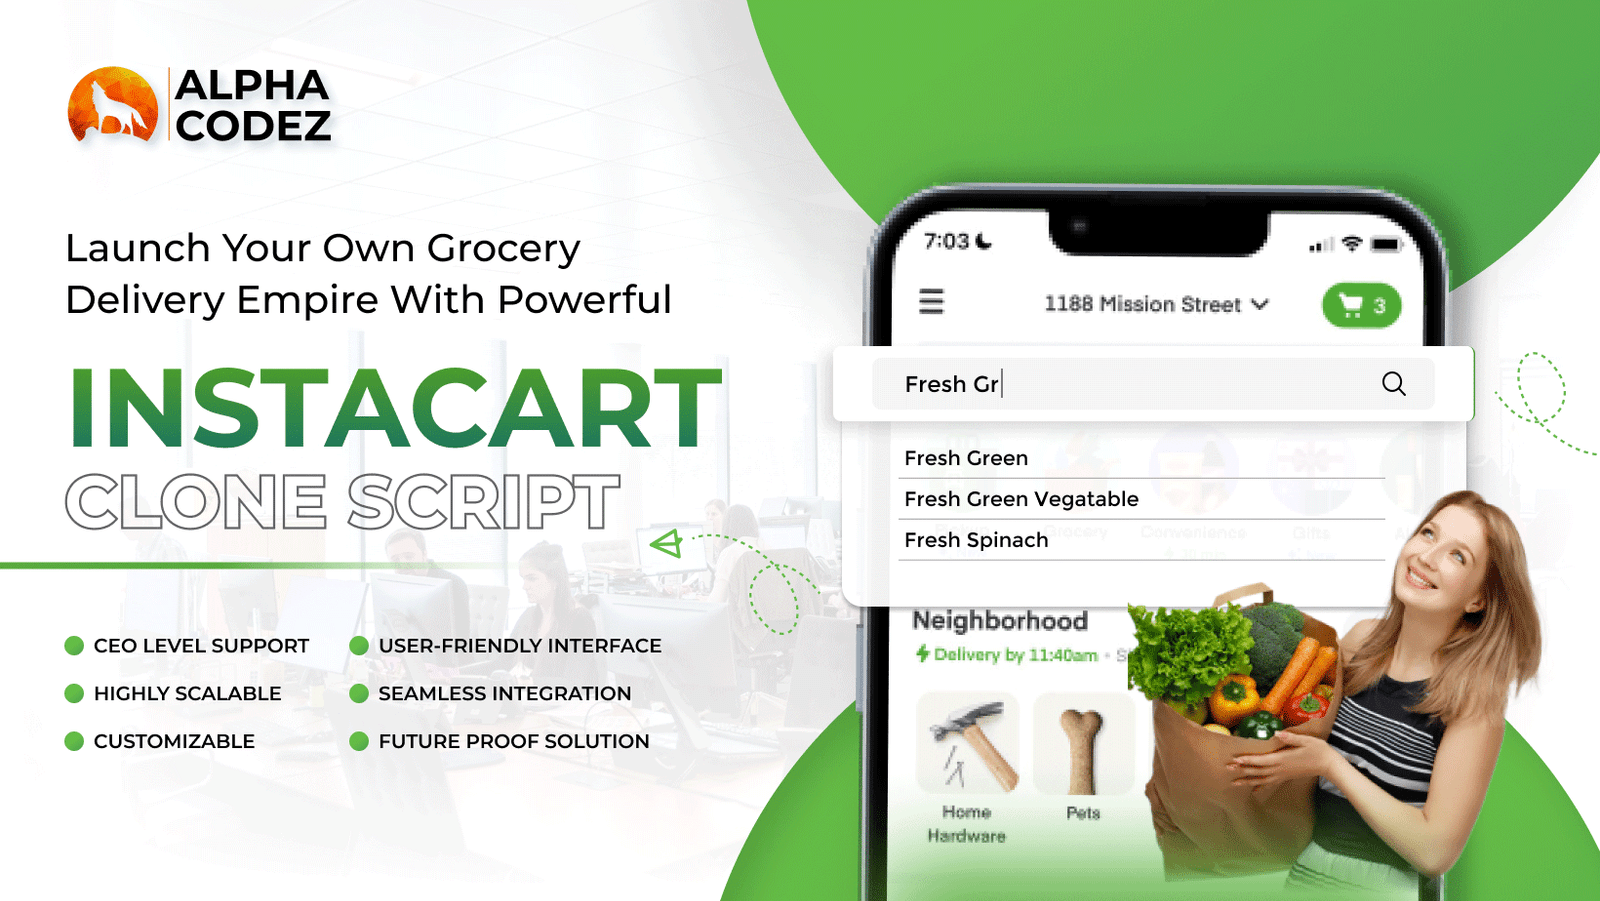 Instacart Clone Script | Launch Your Own Grocery Delivery App